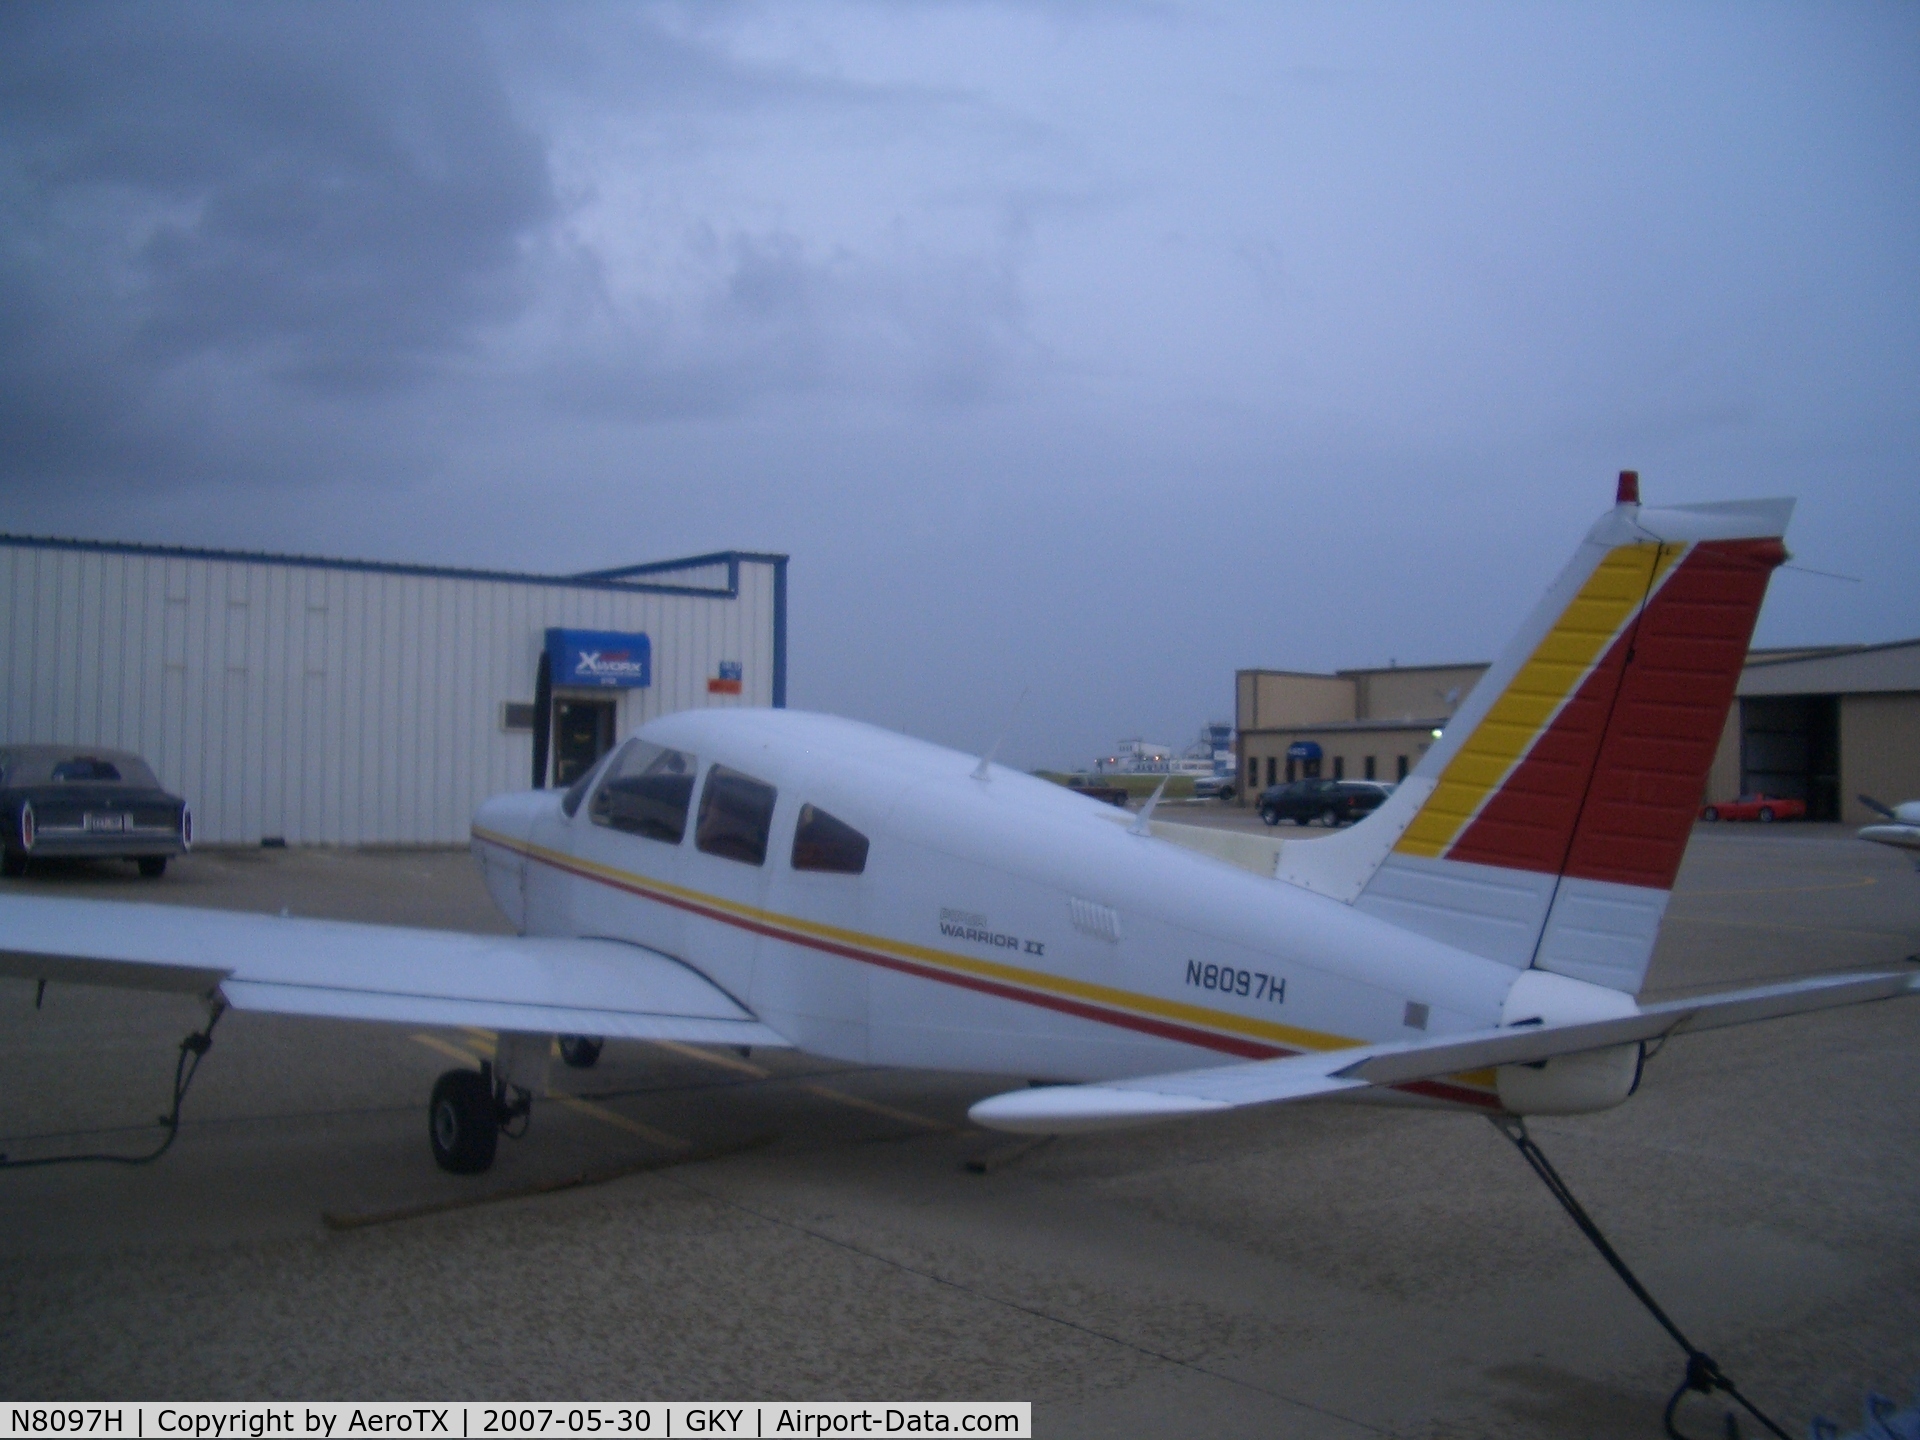 N8097H, 1979 Piper PA-28-161 C/N 28-8016092, PA-28-161 at GKY